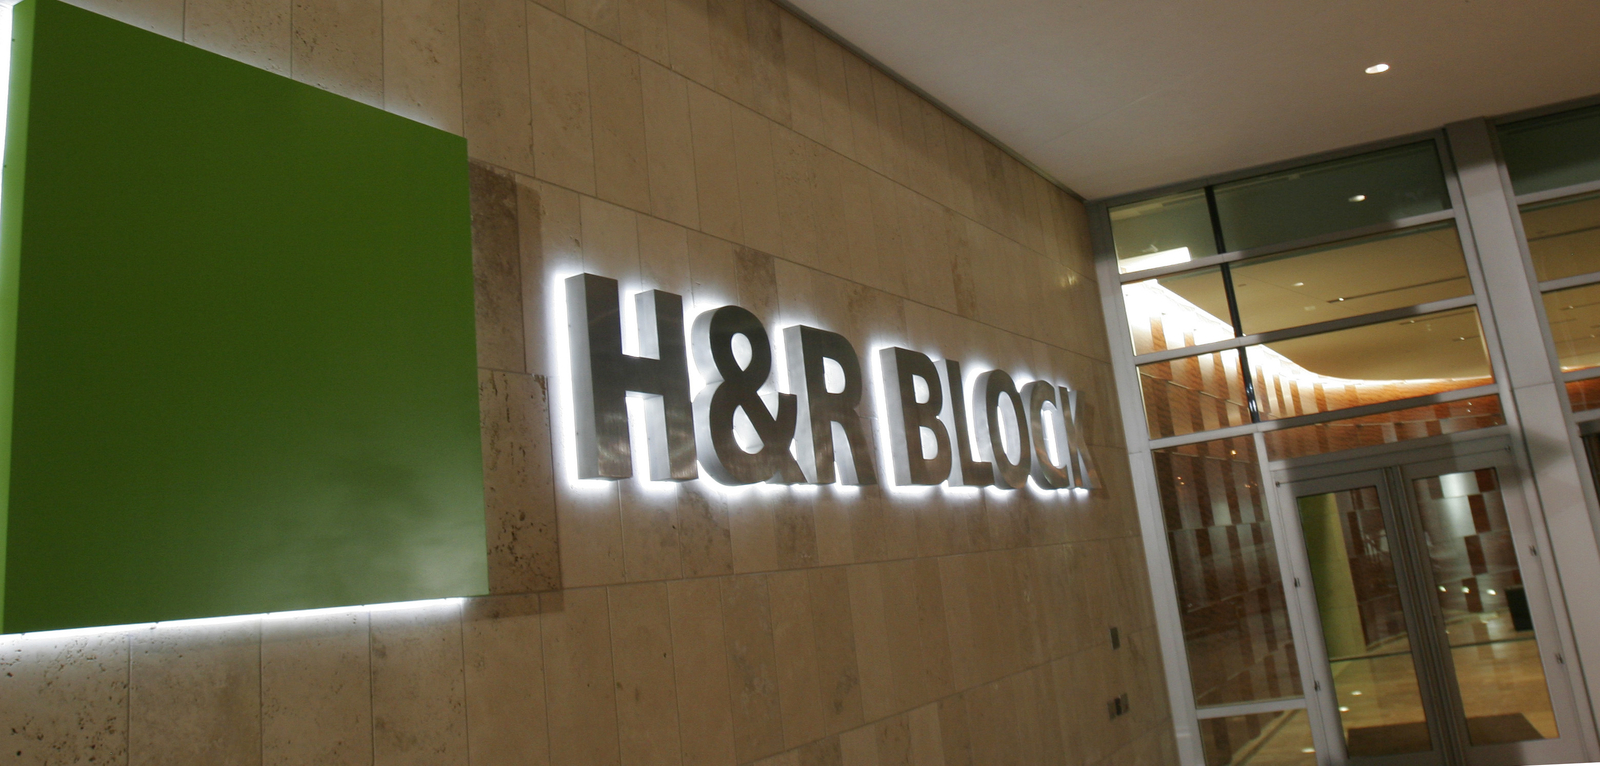 Getting an H&R Block bad gateway message? Company says they have resolved the ‘issue’ on Tax Day [Video]